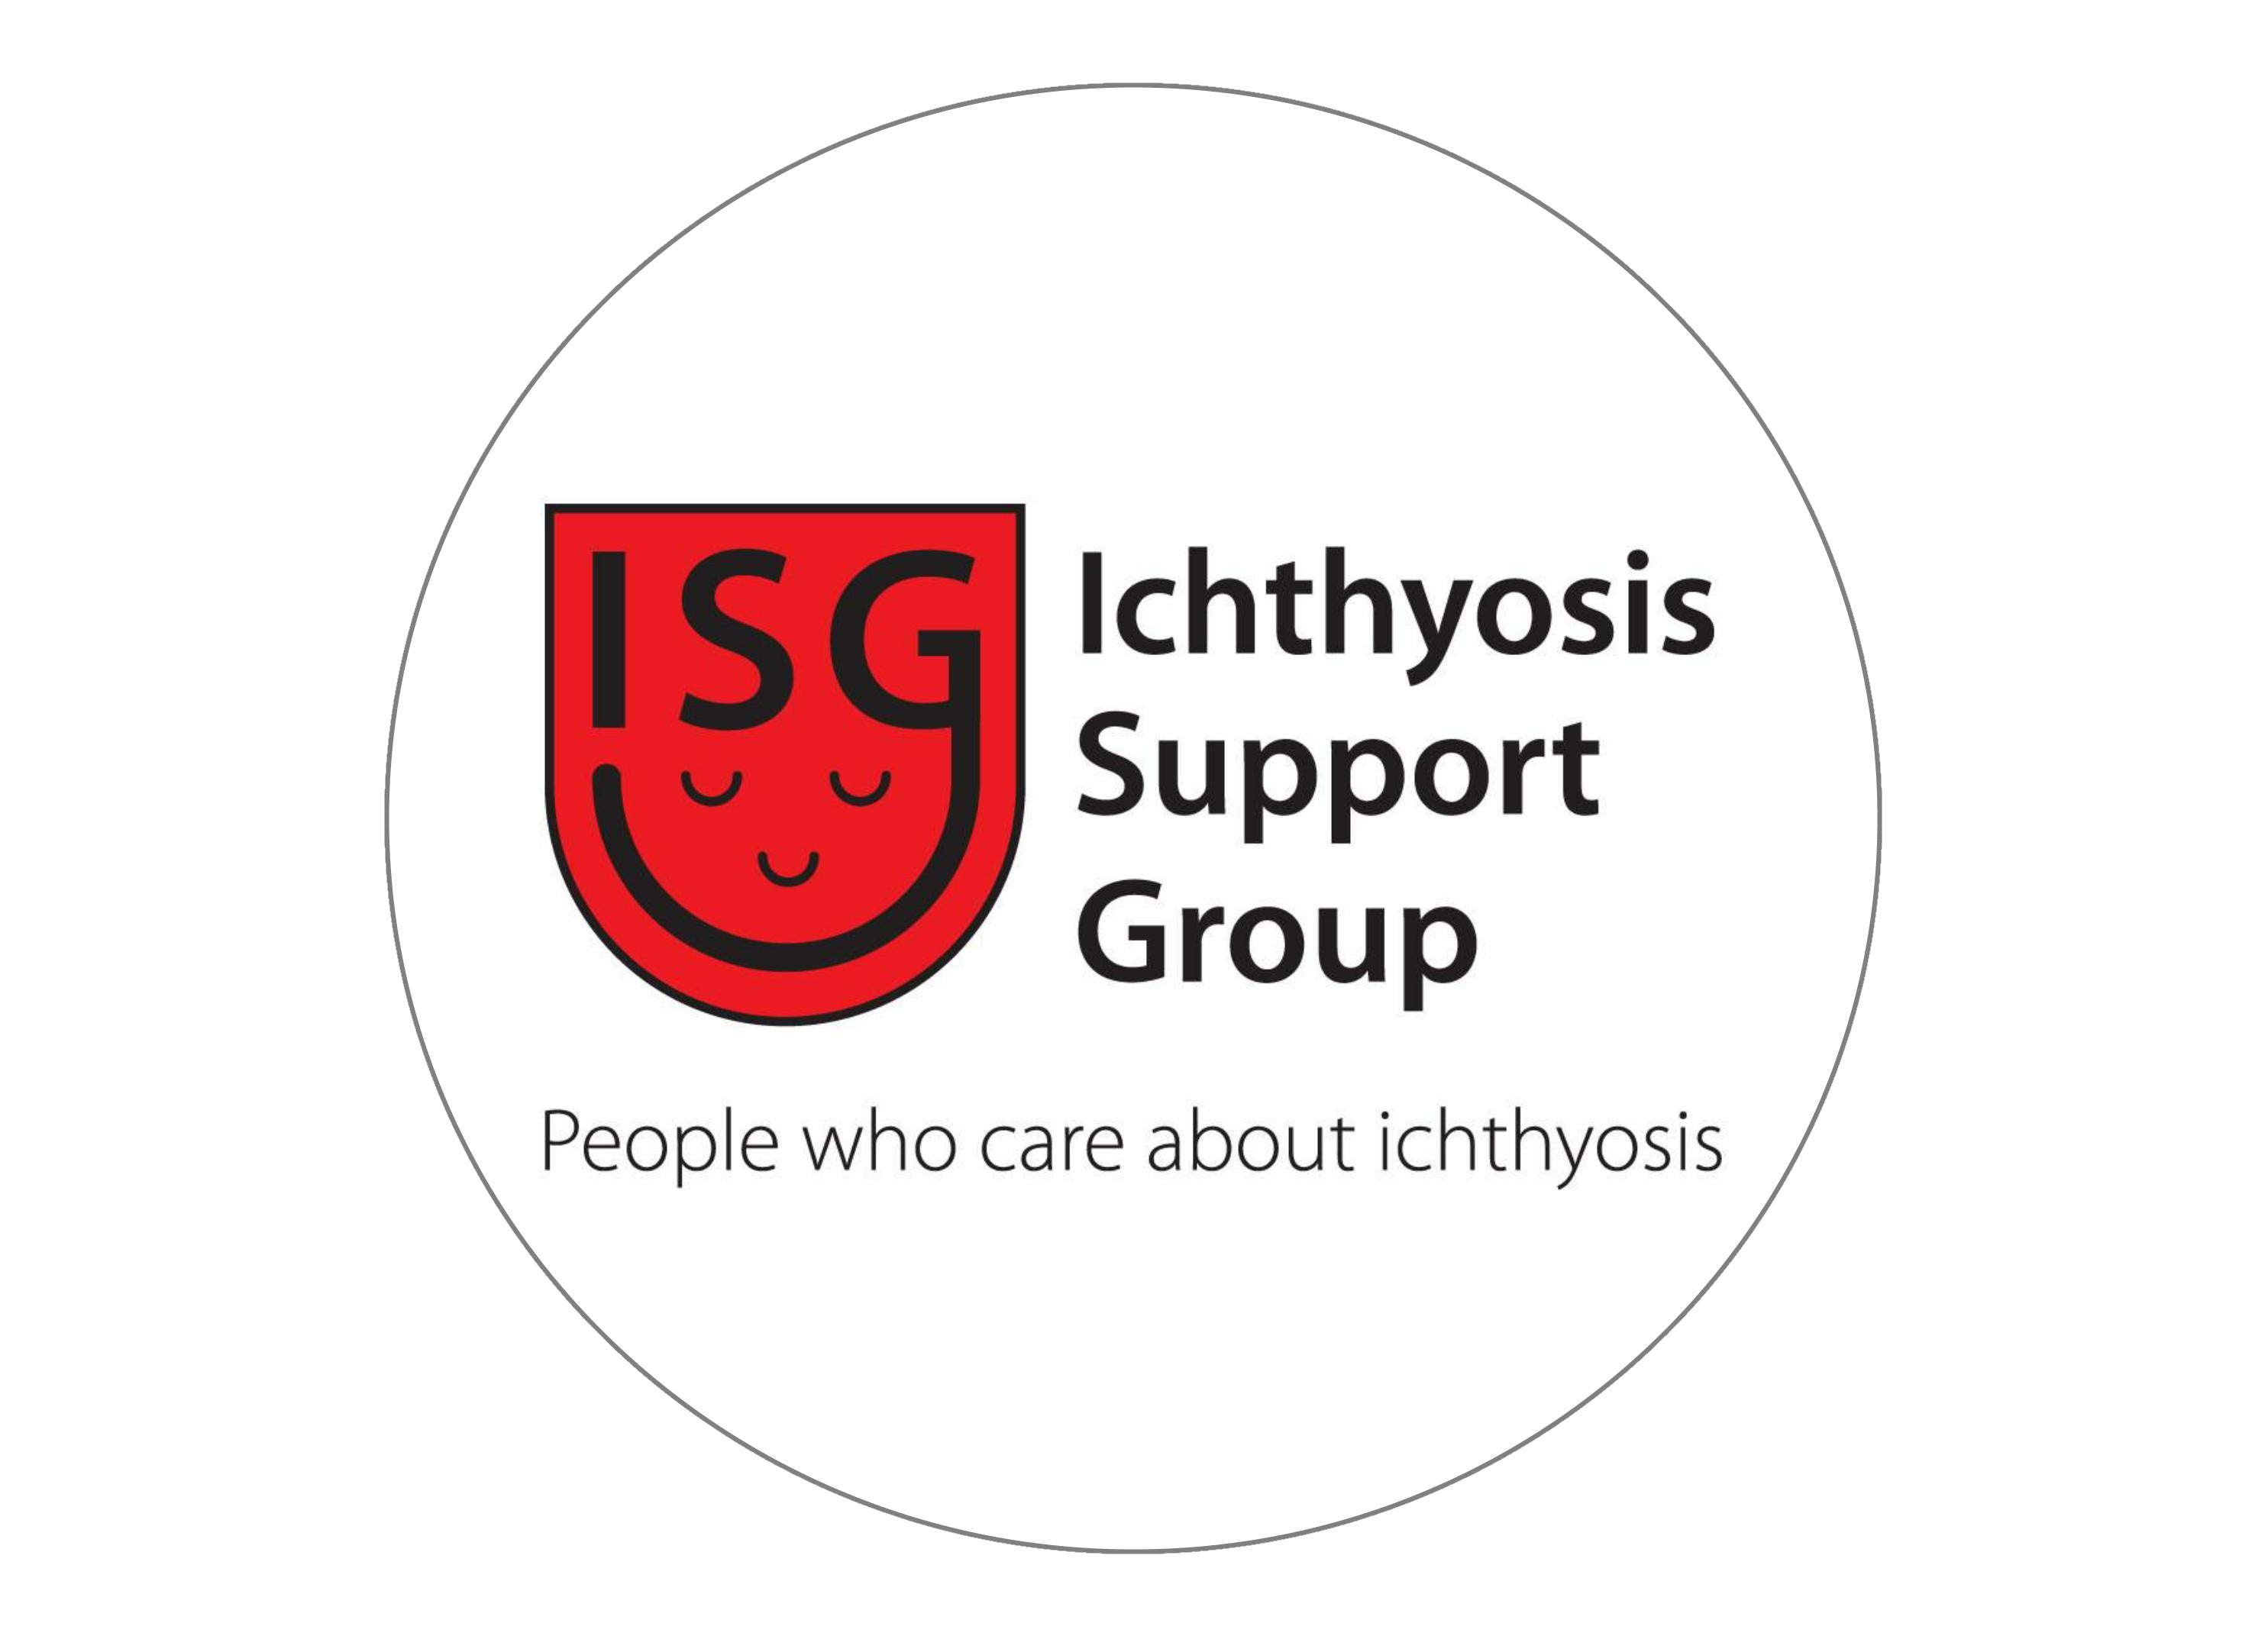 The Ichthyosis Support Group (ISG)